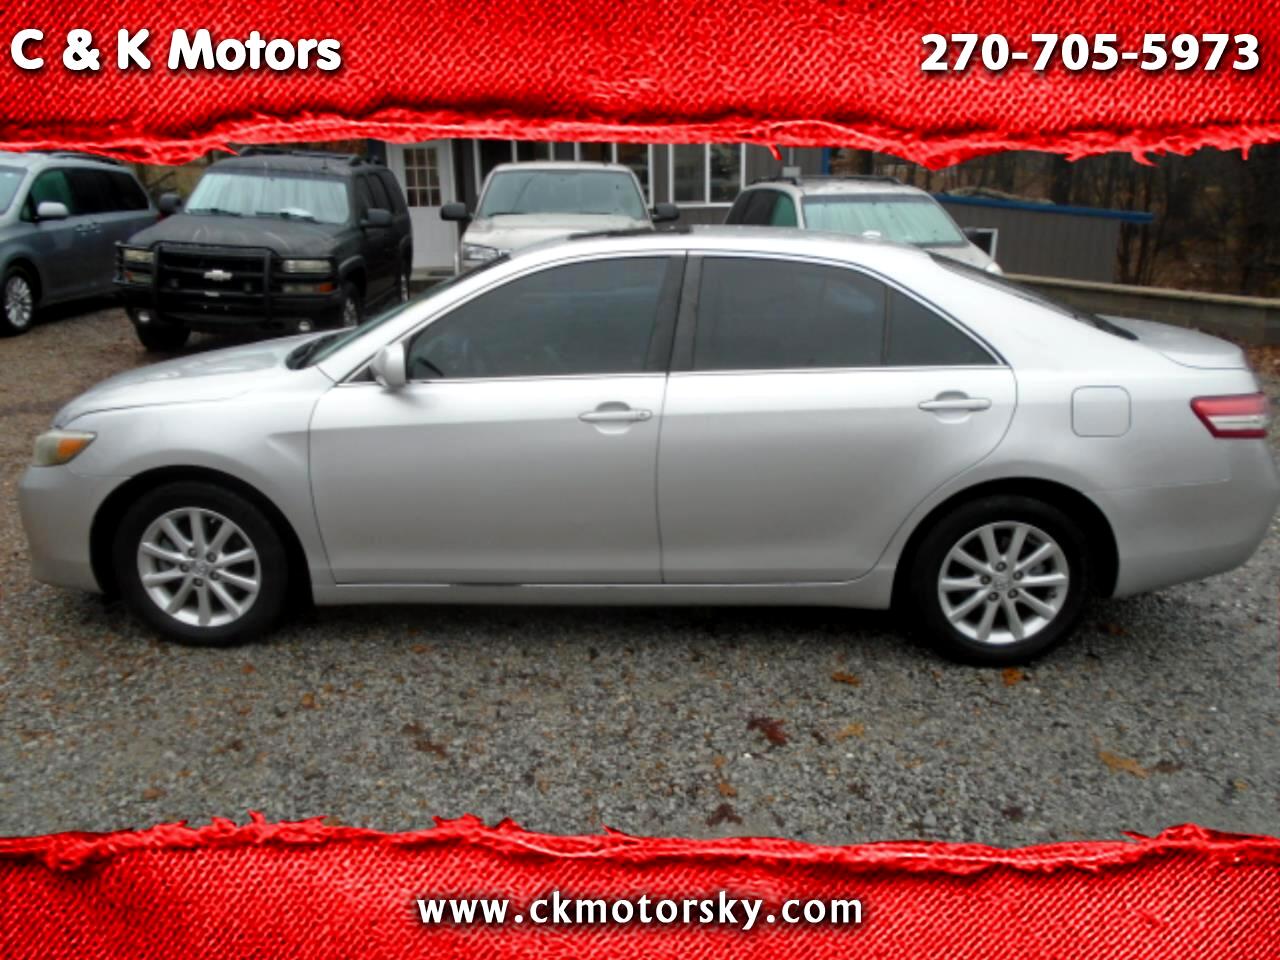 2011 Toyota Camry 4dr Sdn I4 Auto XLE (Natl)